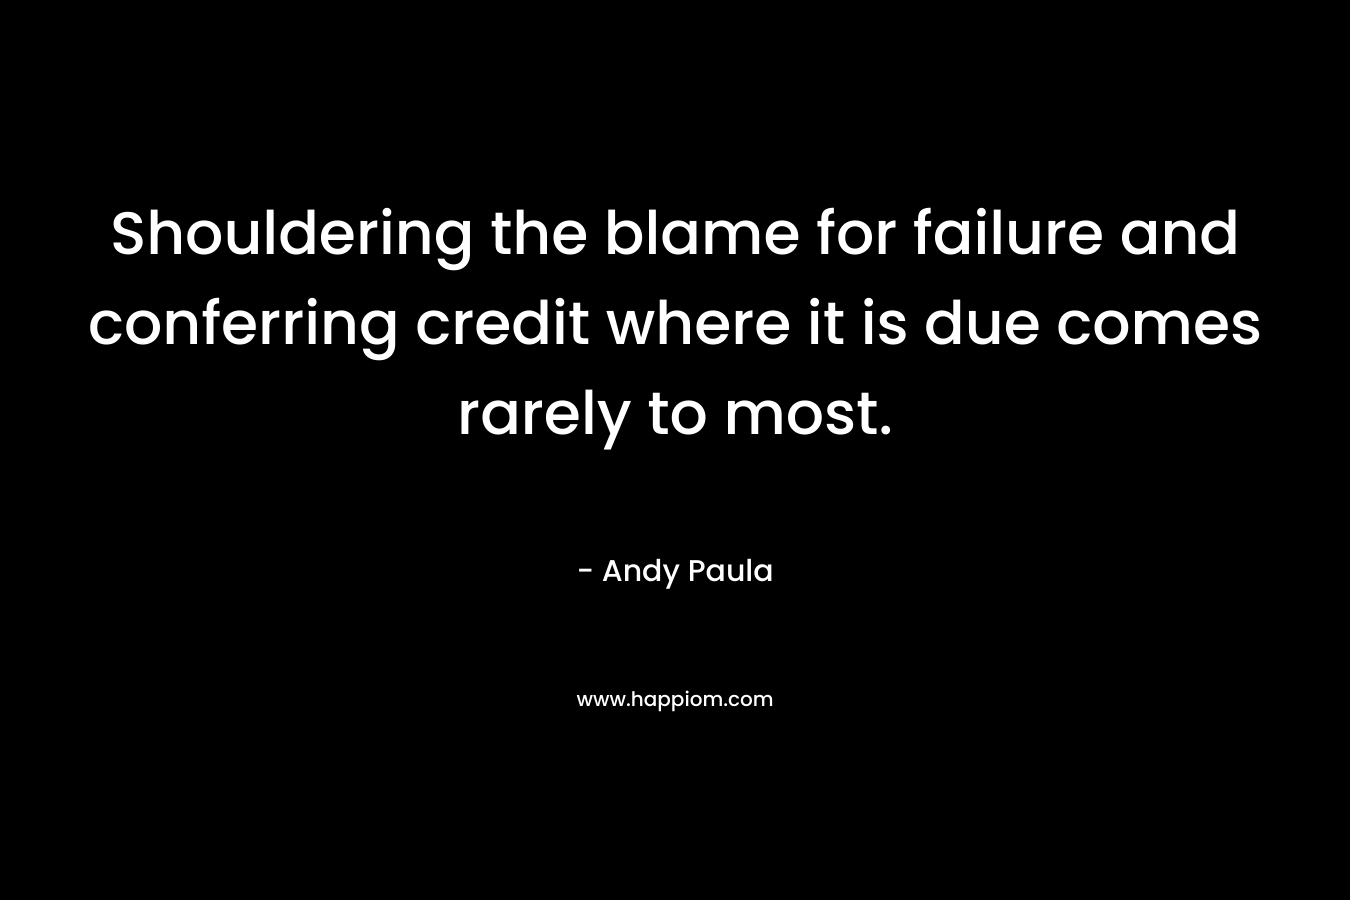 Shouldering the blame for failure and conferring credit where it is due comes rarely to most.